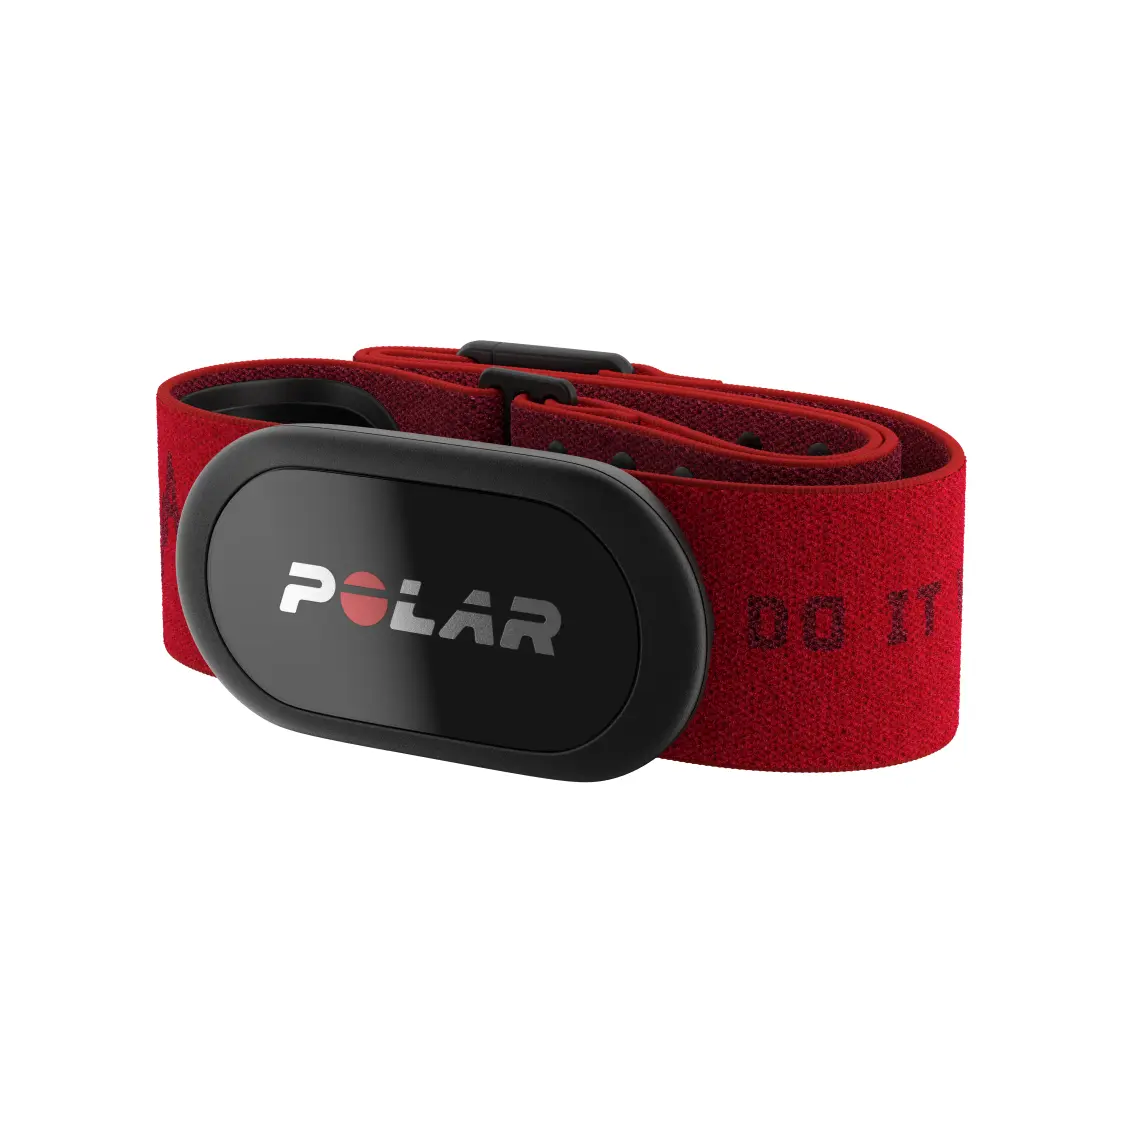 POLAR H10 Heart Rate Monitor, Bluetooth HRM Chest Strap - iPhone & Android Compatible, Black